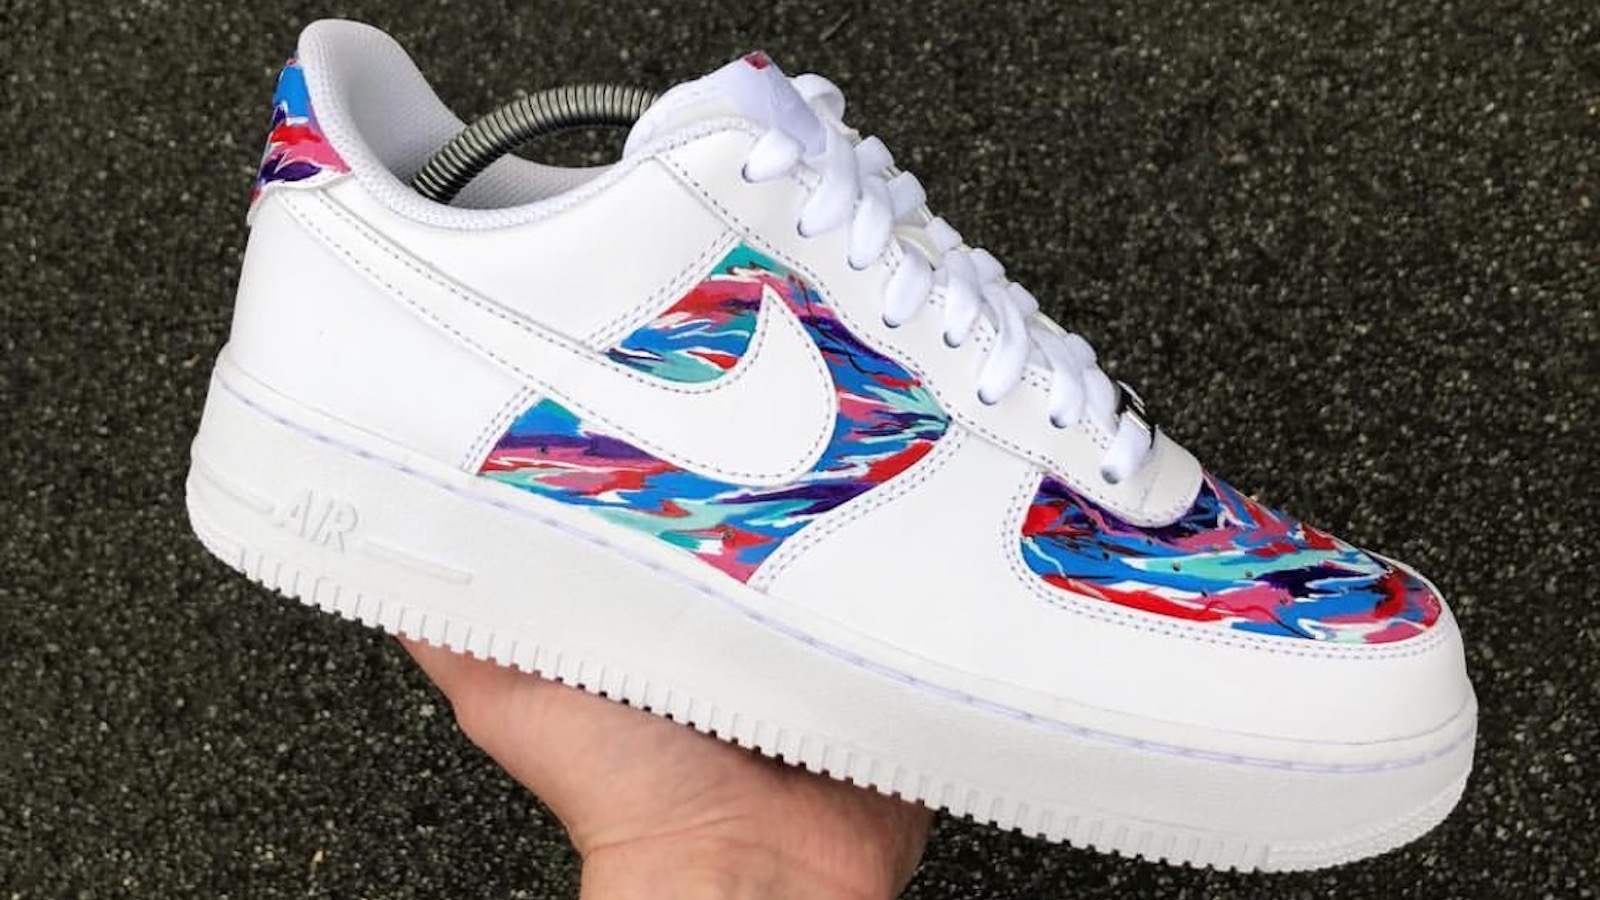 10 ways to customize your sneakers for 